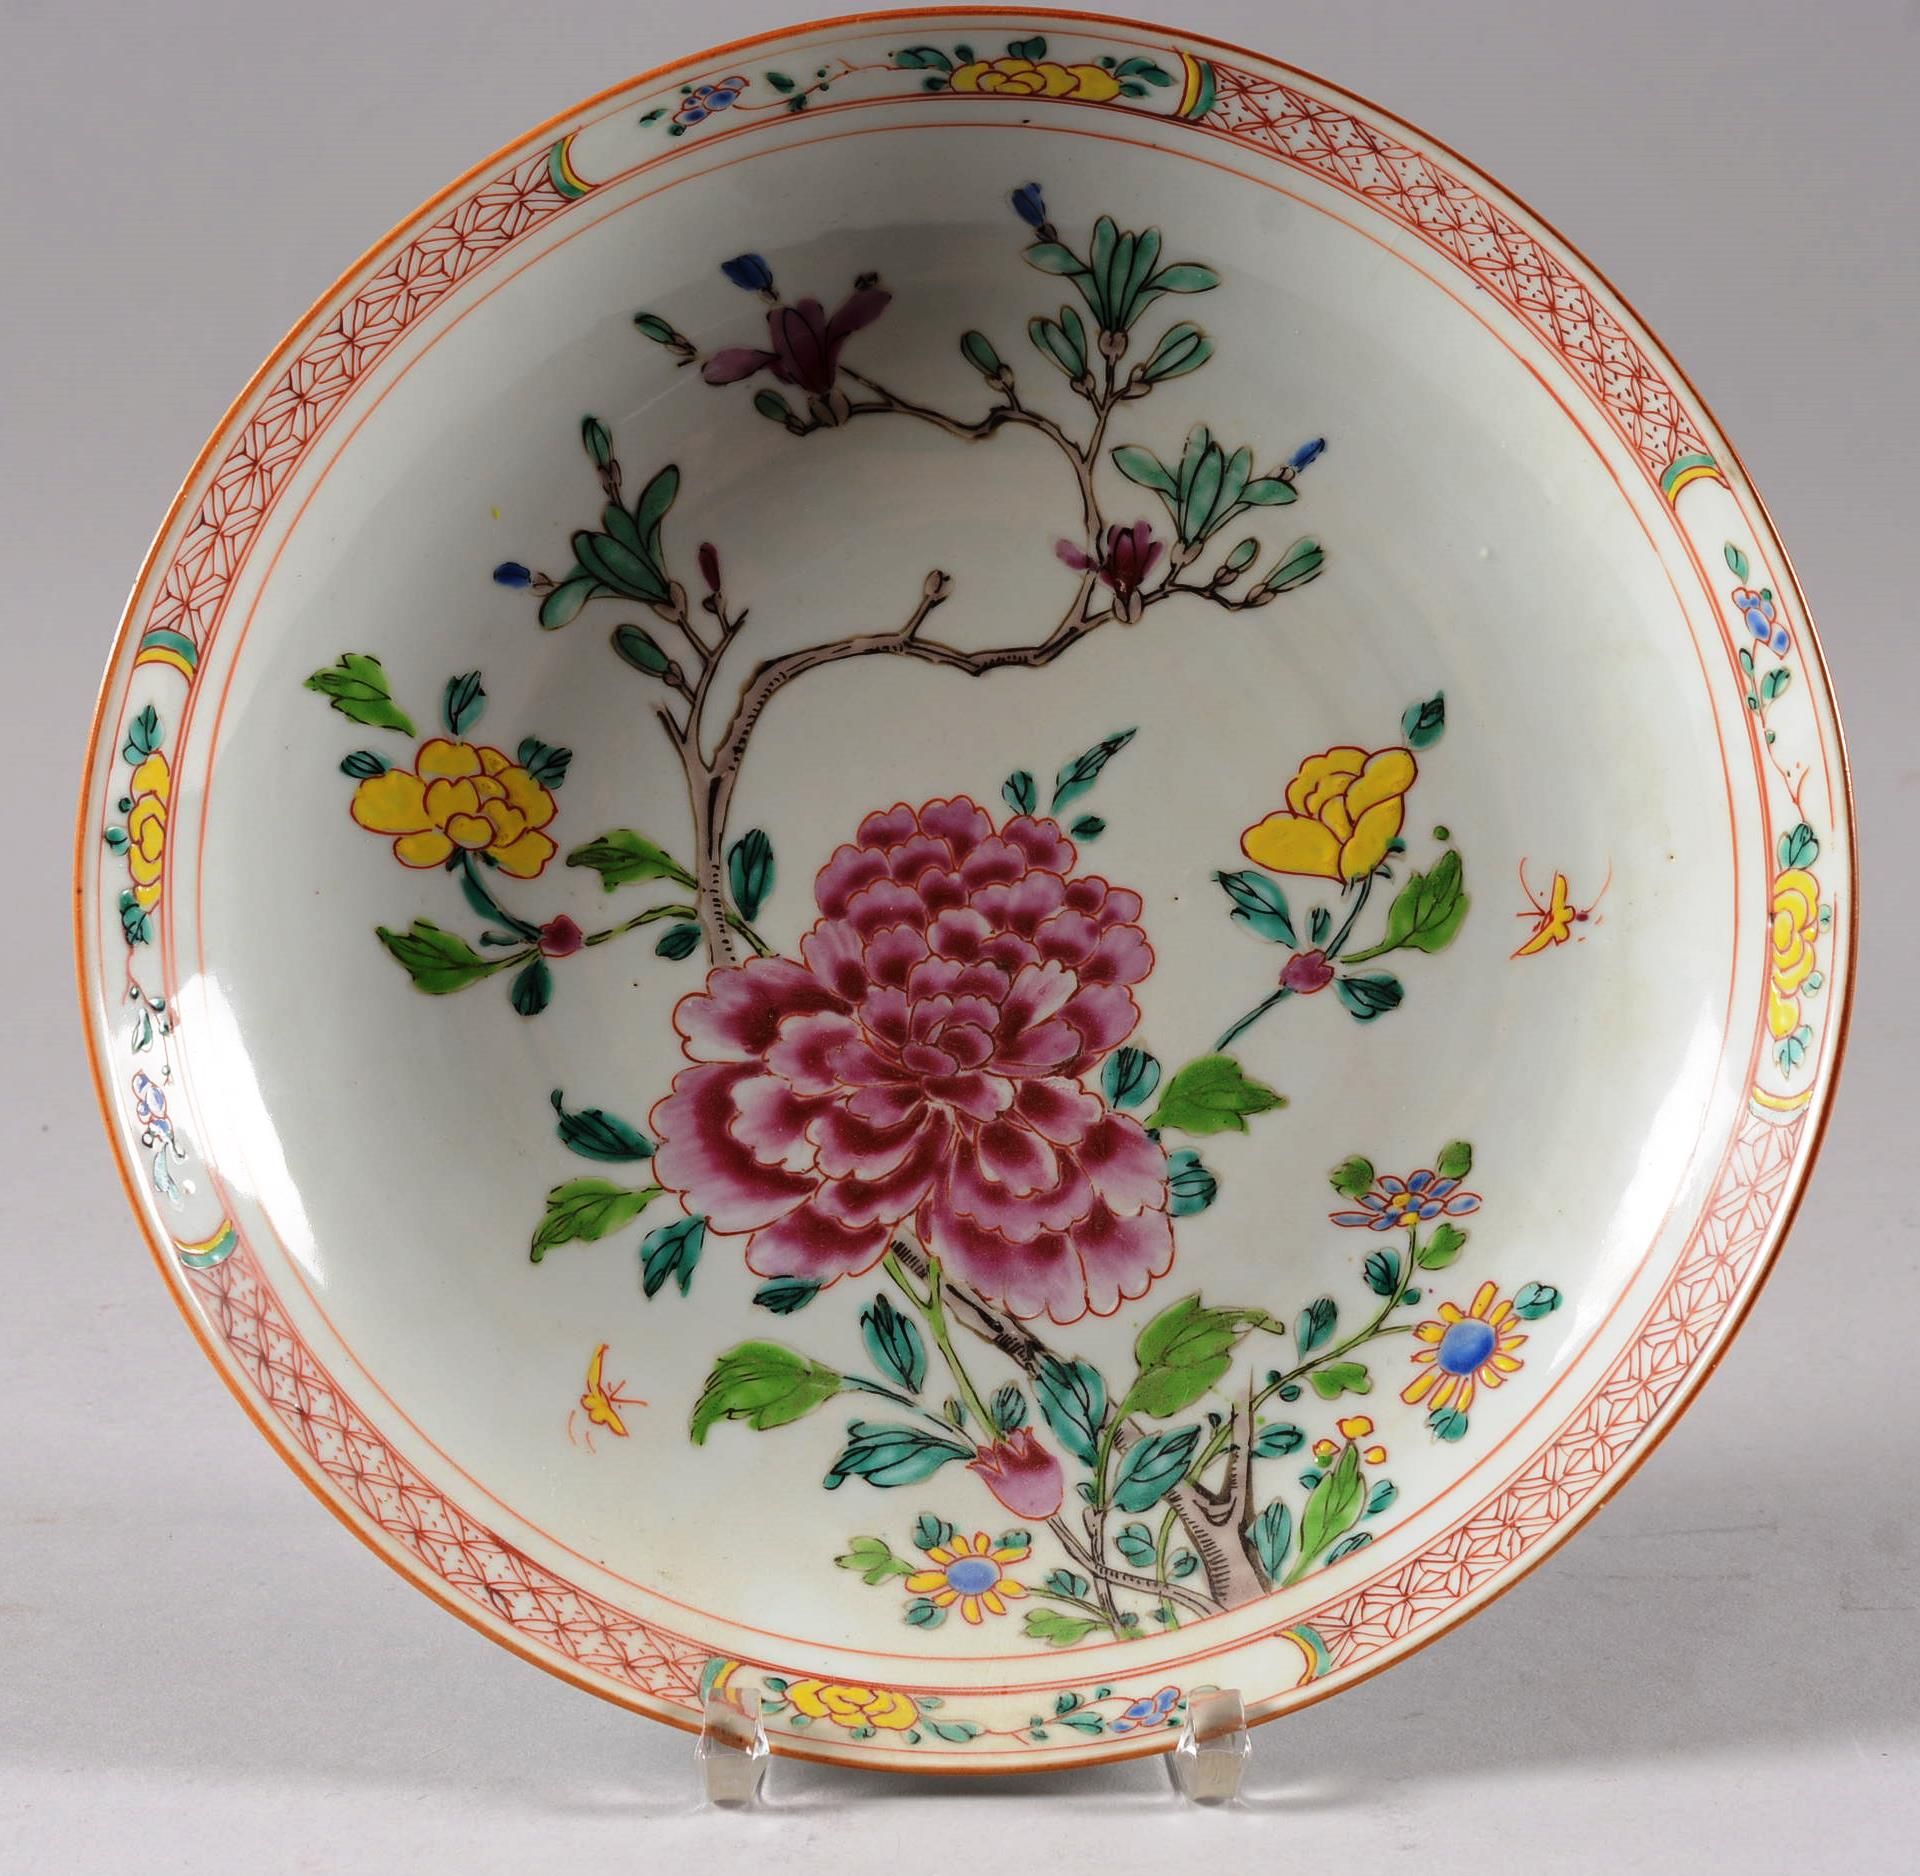 Coupe circulaire en porcelaine chinoise CHINA.

Chinese porcelain circular bowl.&hellip;